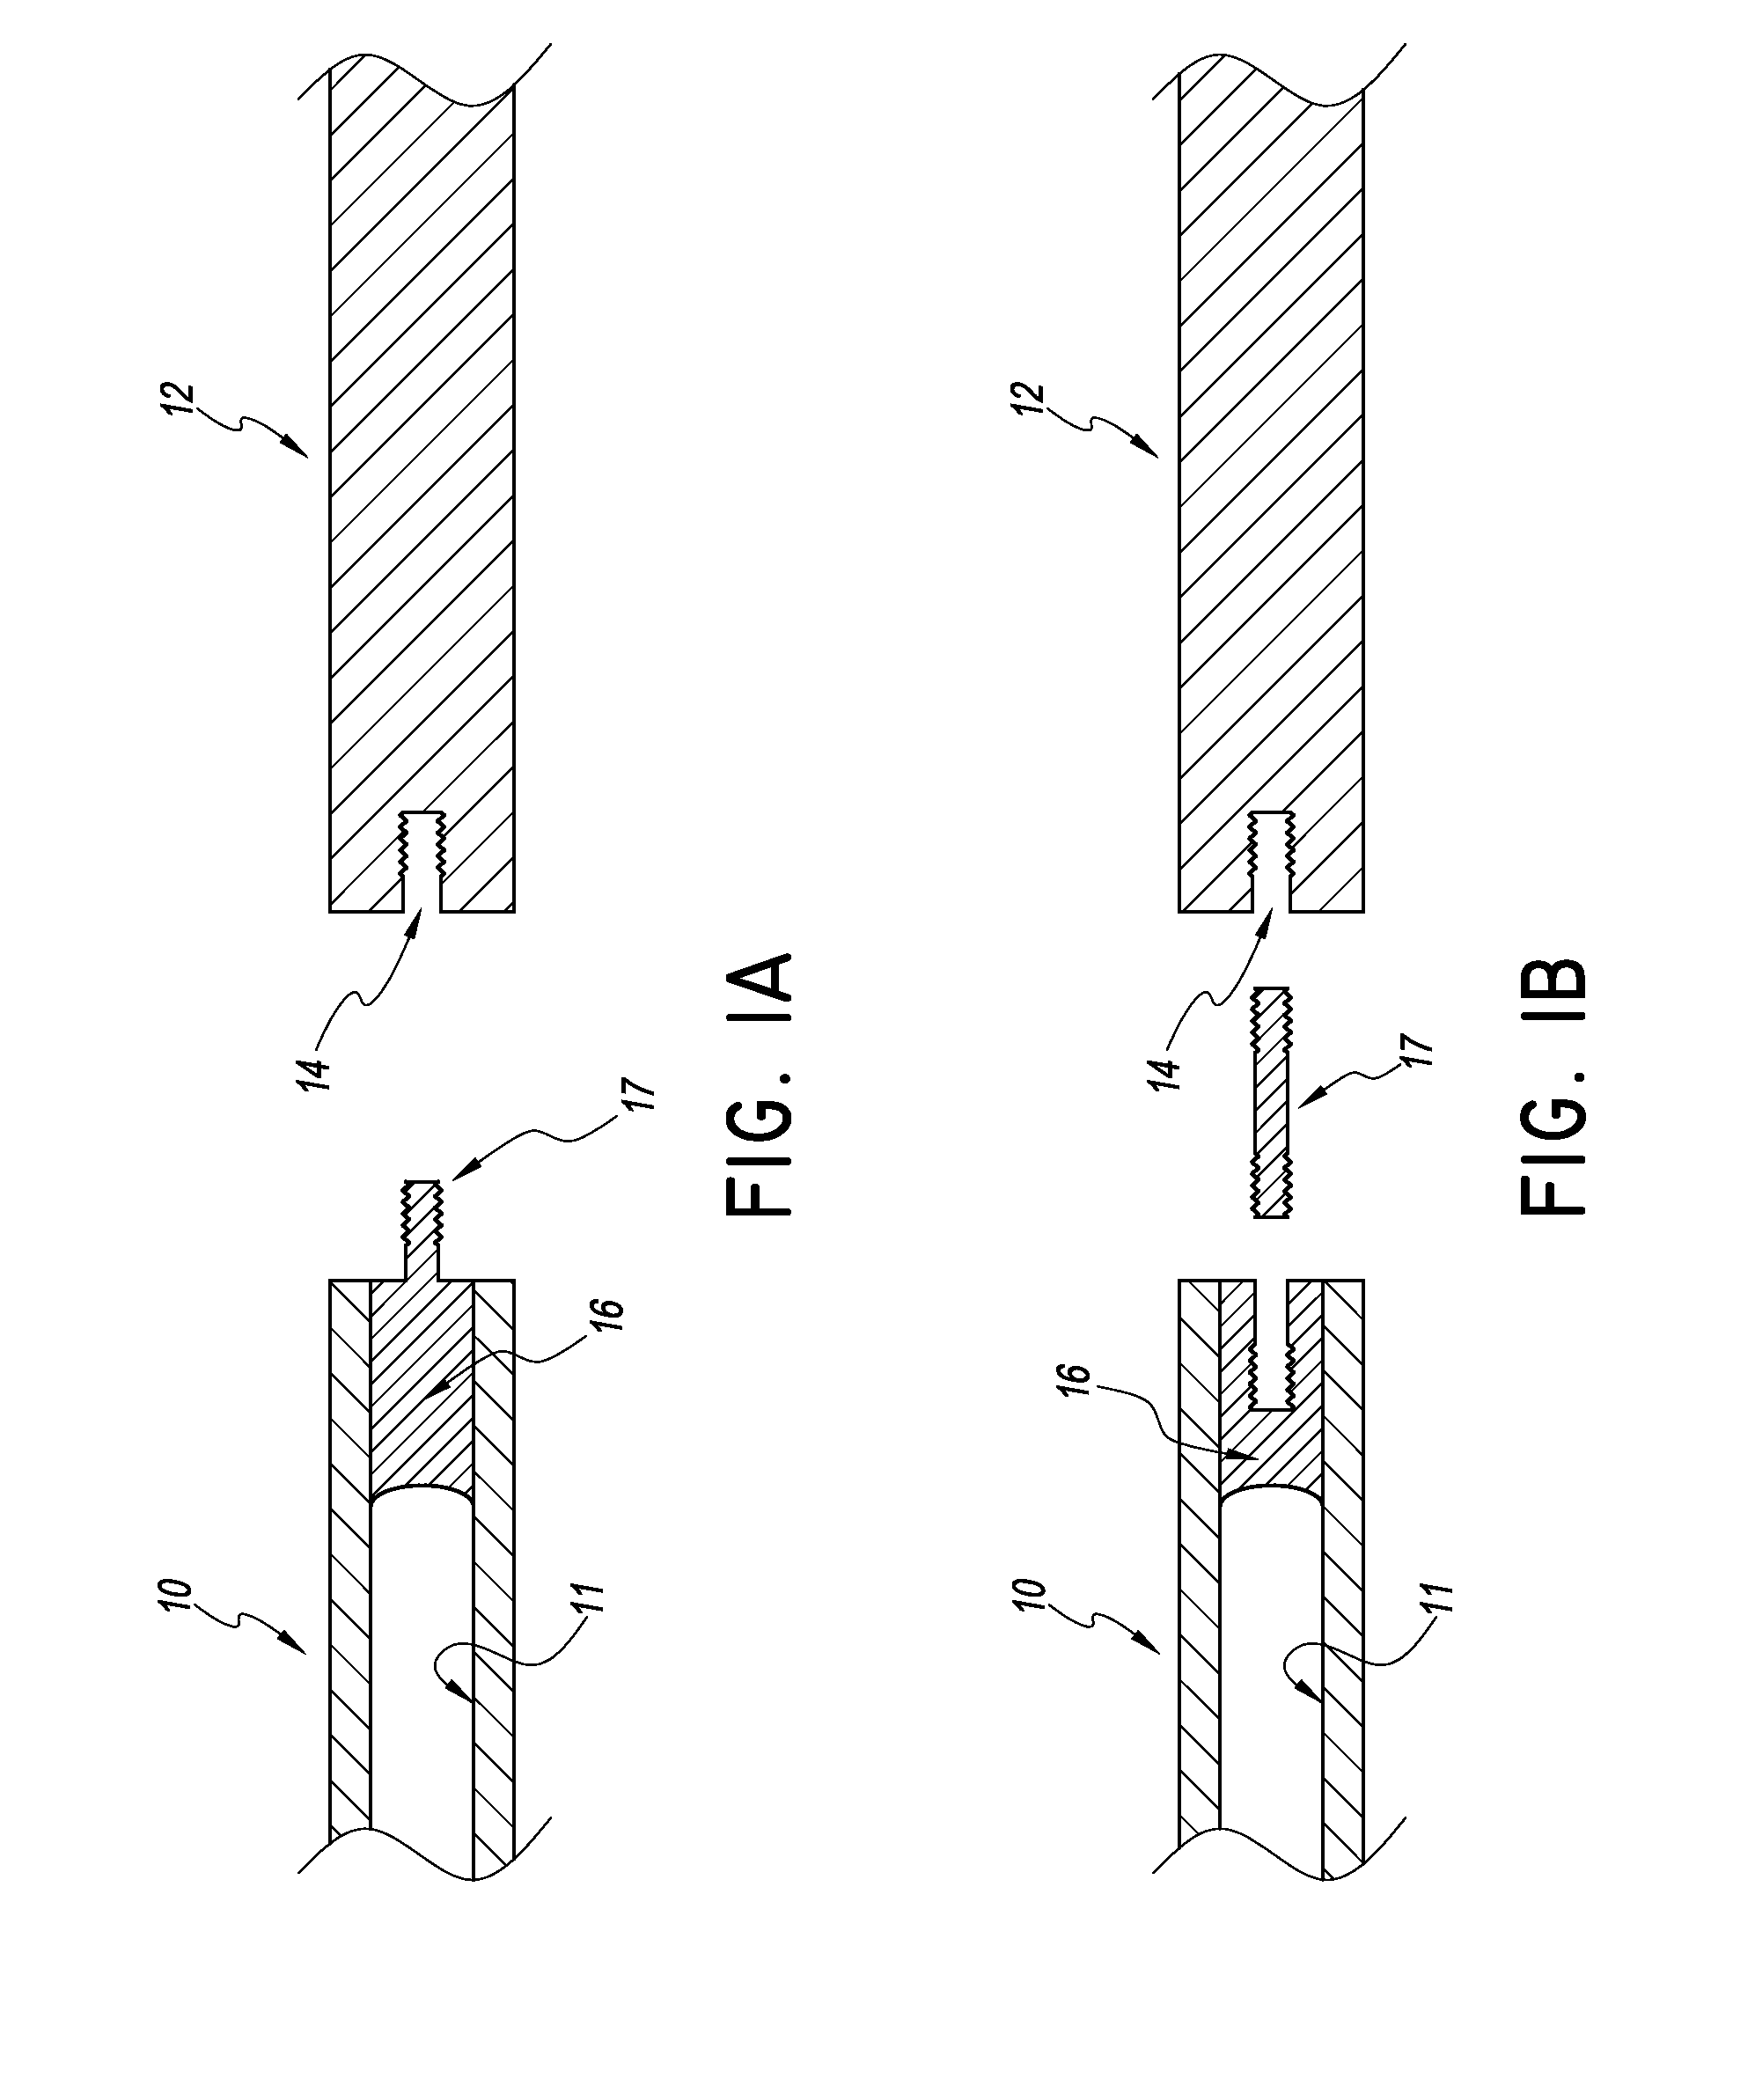 Method and devices for flow occlusion during device exchanges